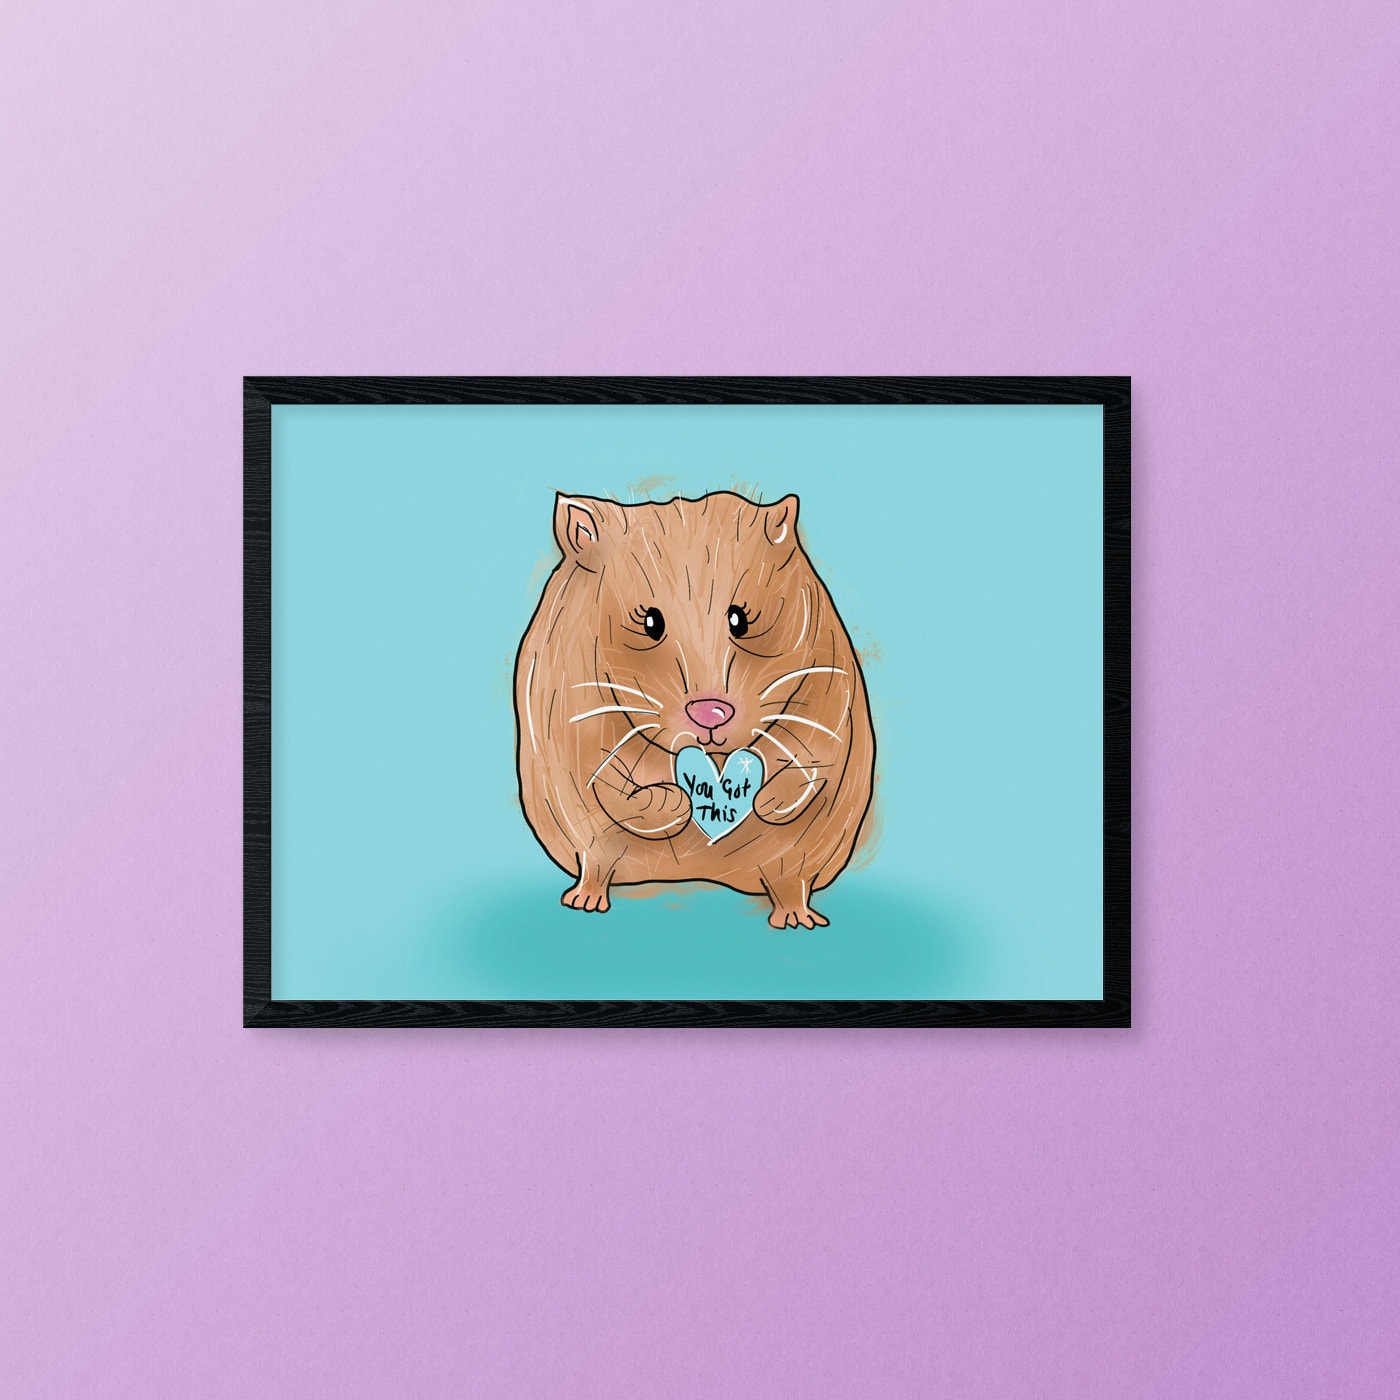 You Got This, Hamster Motivational A5 Print